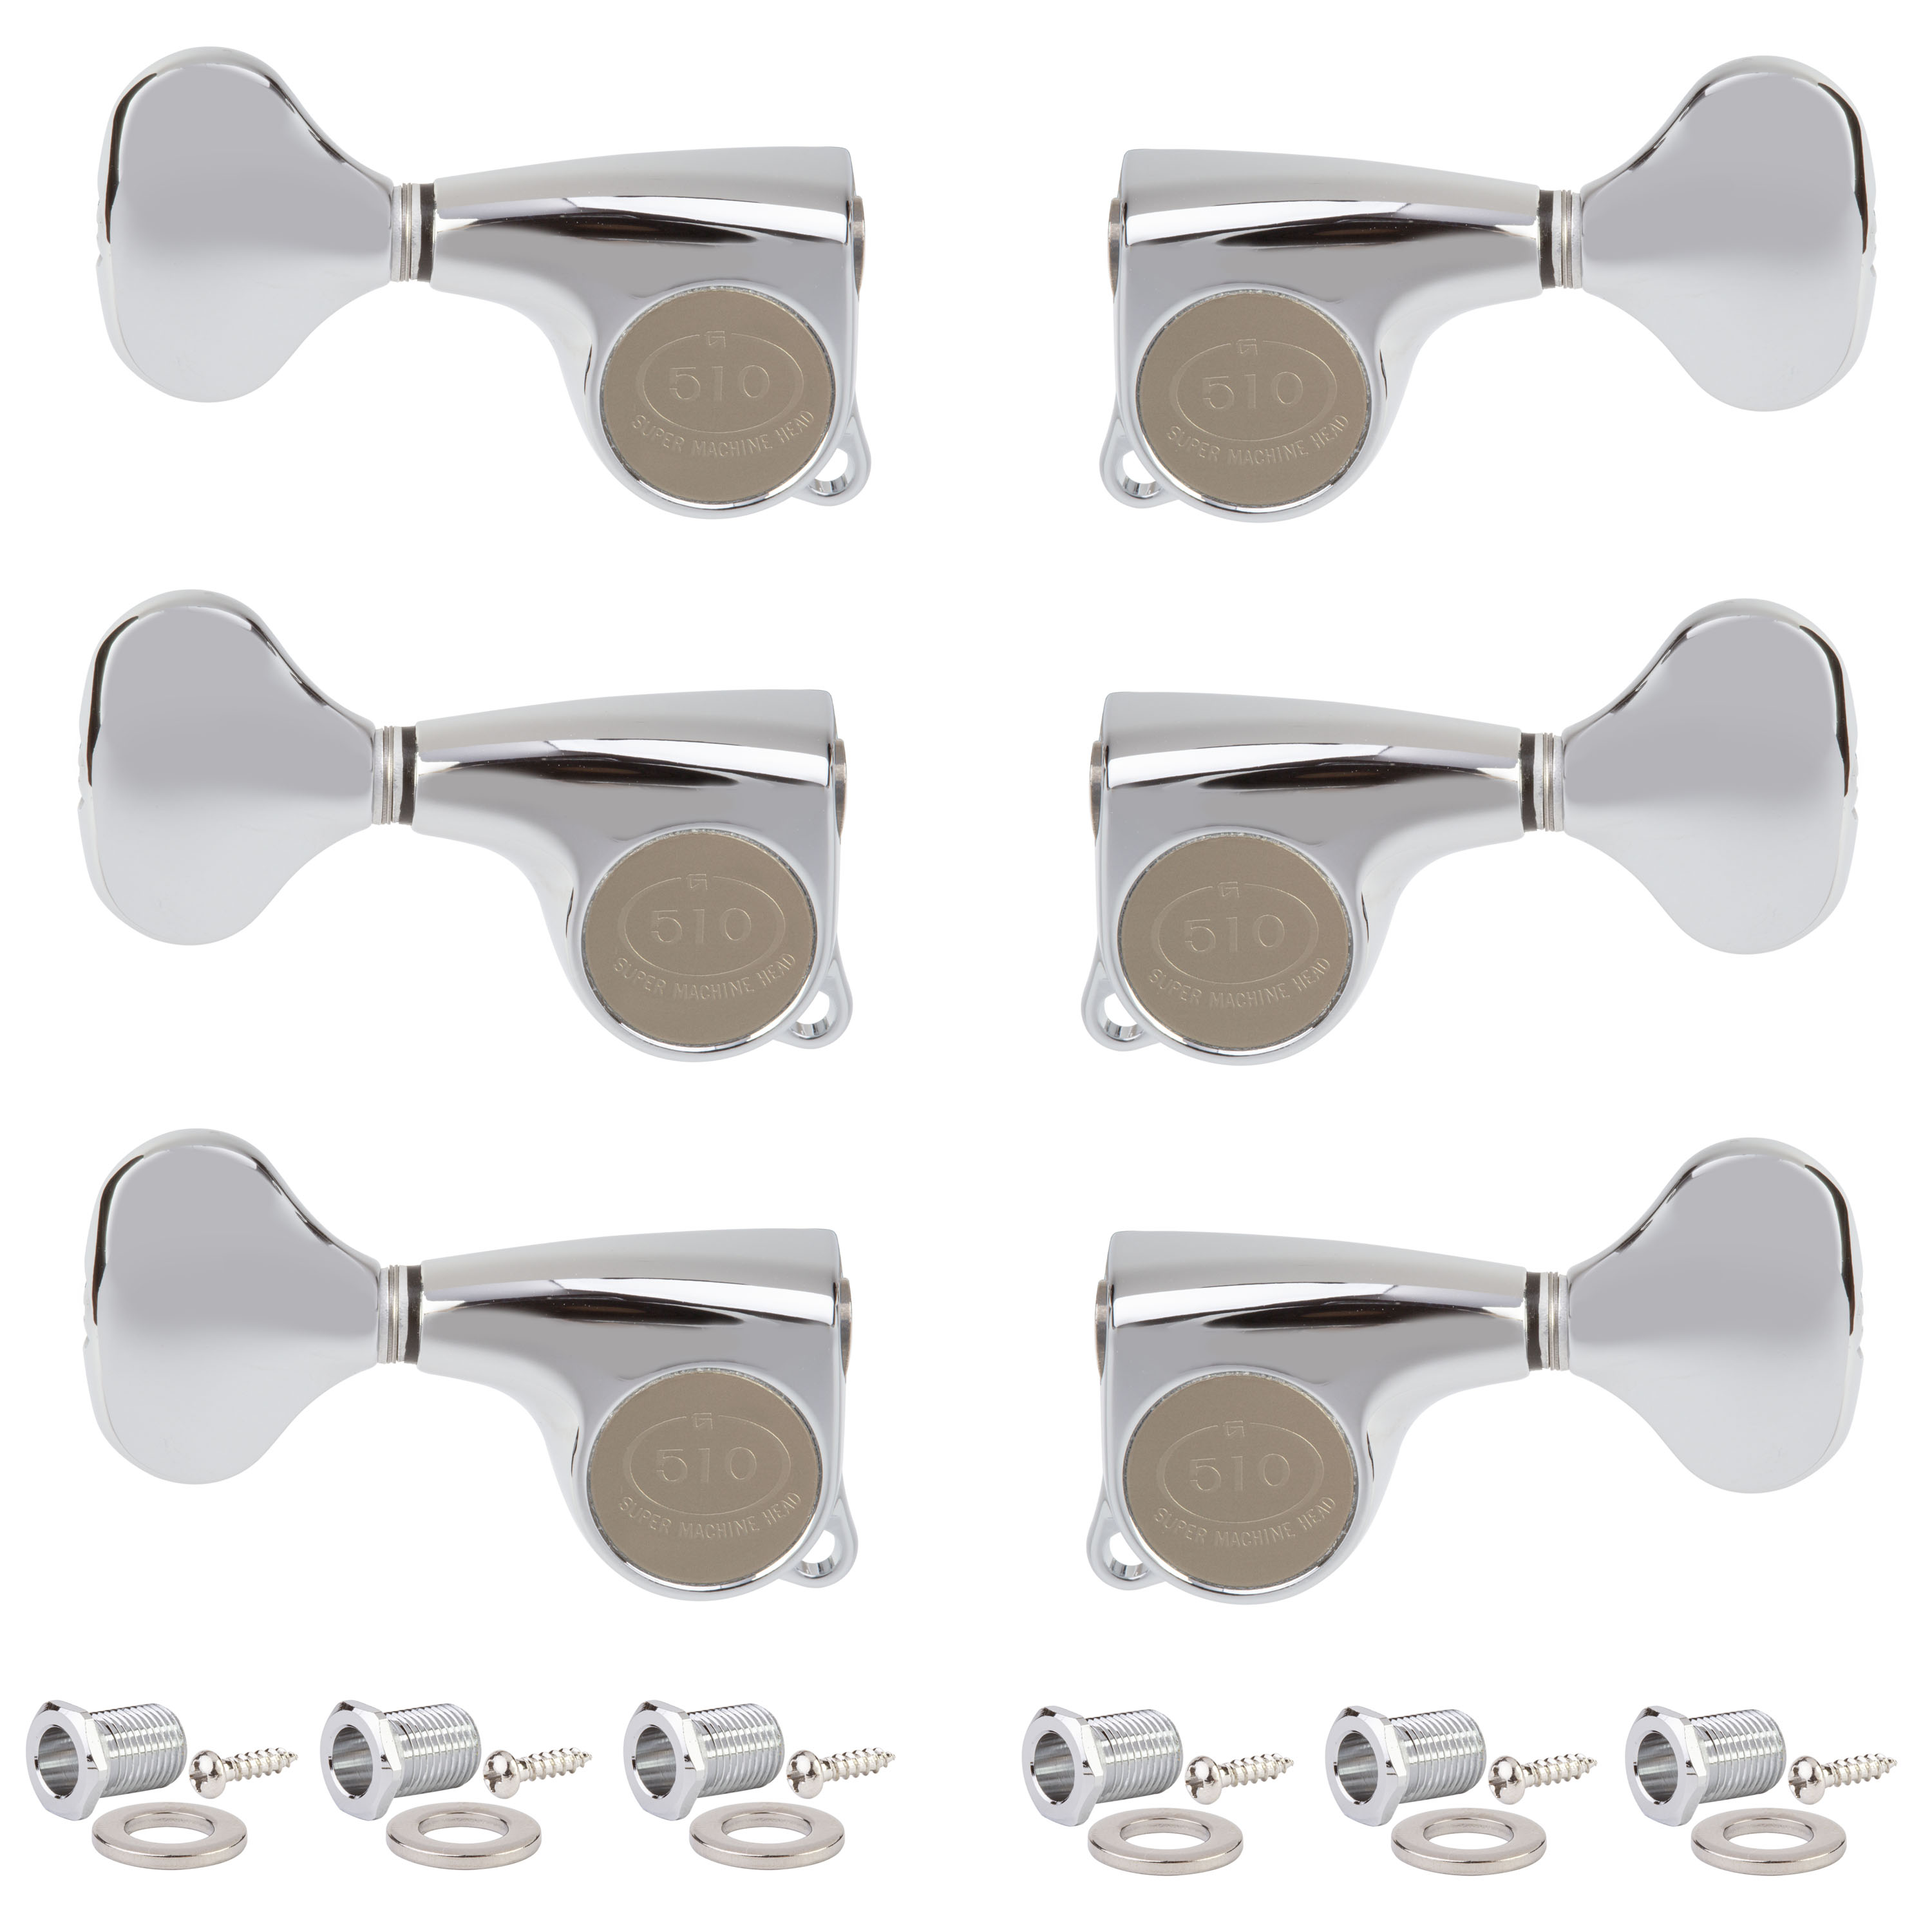 Gotoh Midsize 510 3+3 Tuners with Metal Knobs - StewMac